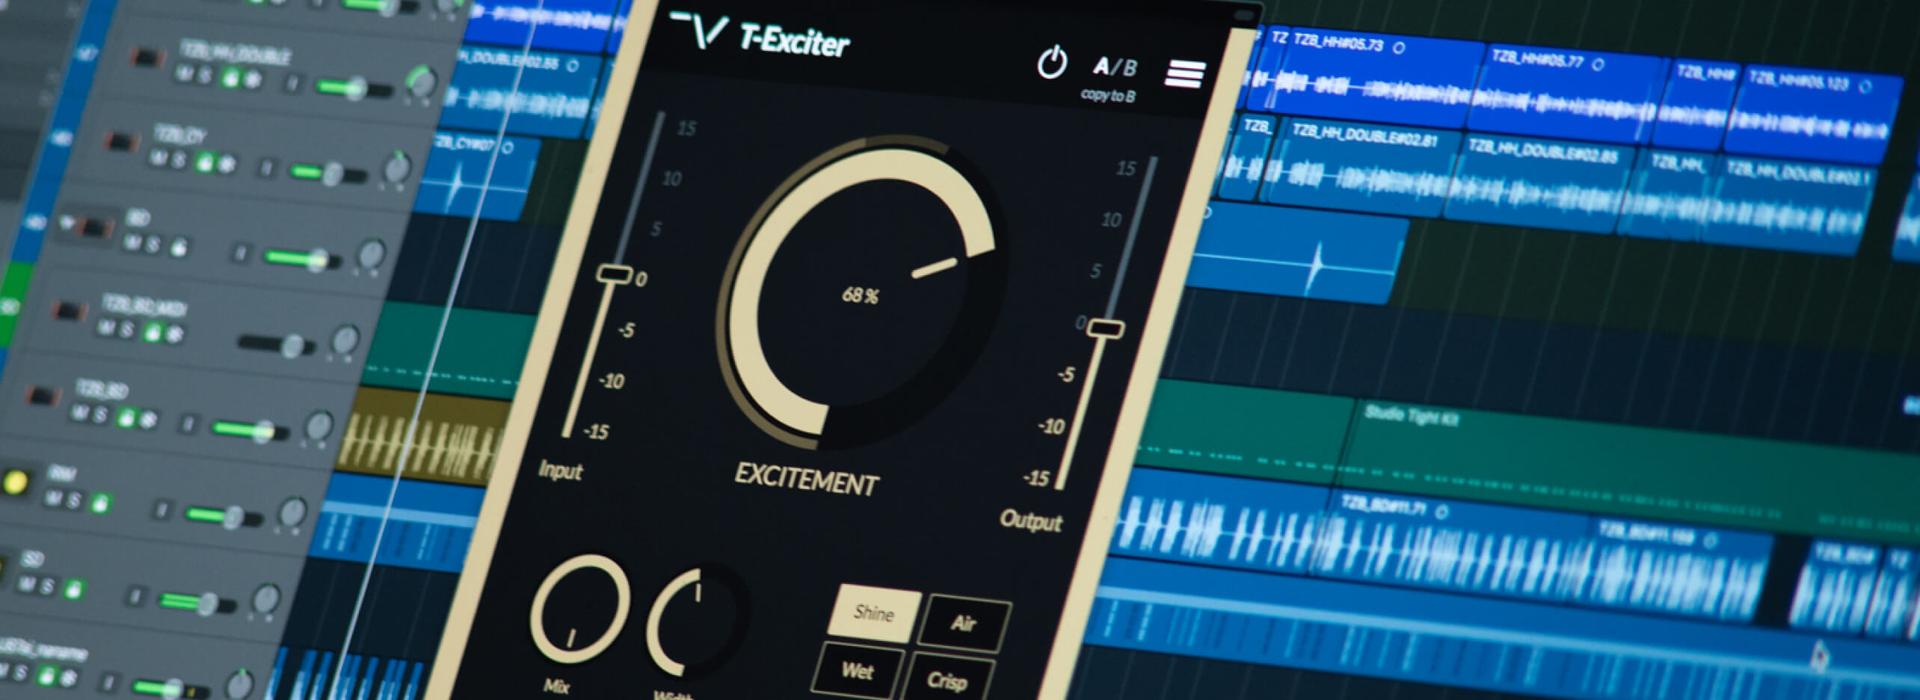 3 Tips on Effectively Using The T-Exciter